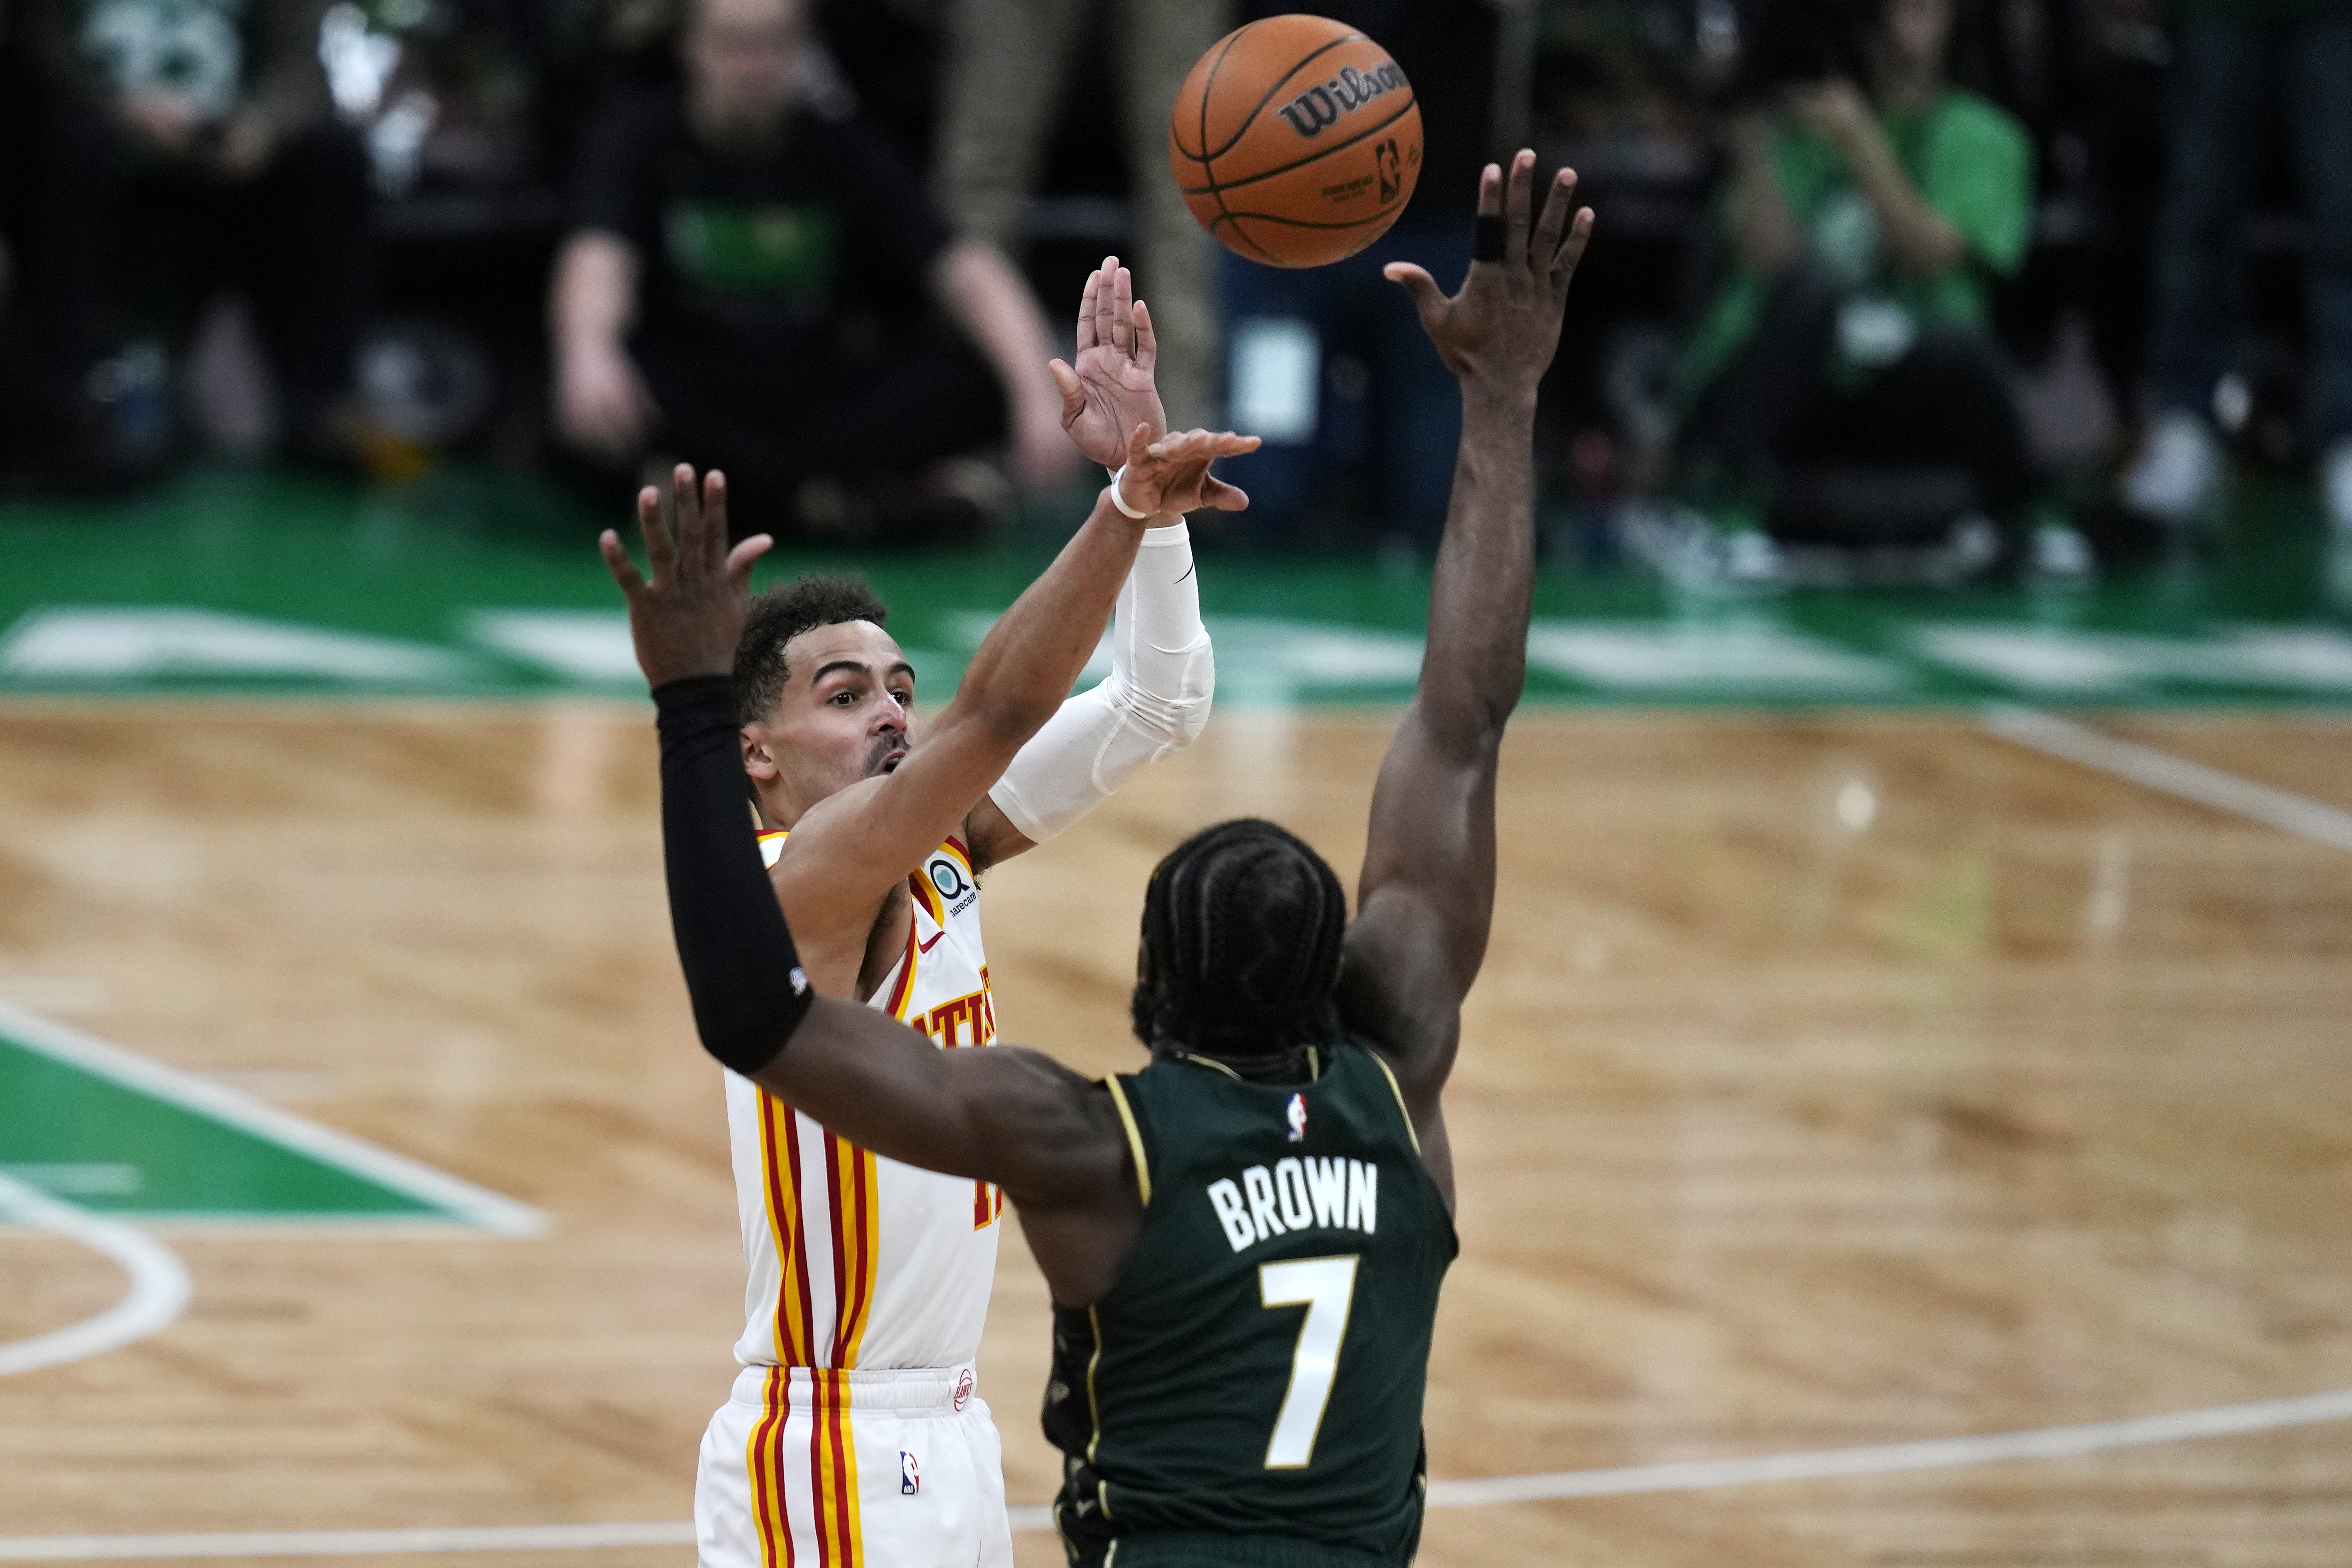 Atlanta's Trae Young shines in first trip to NBA playoffs